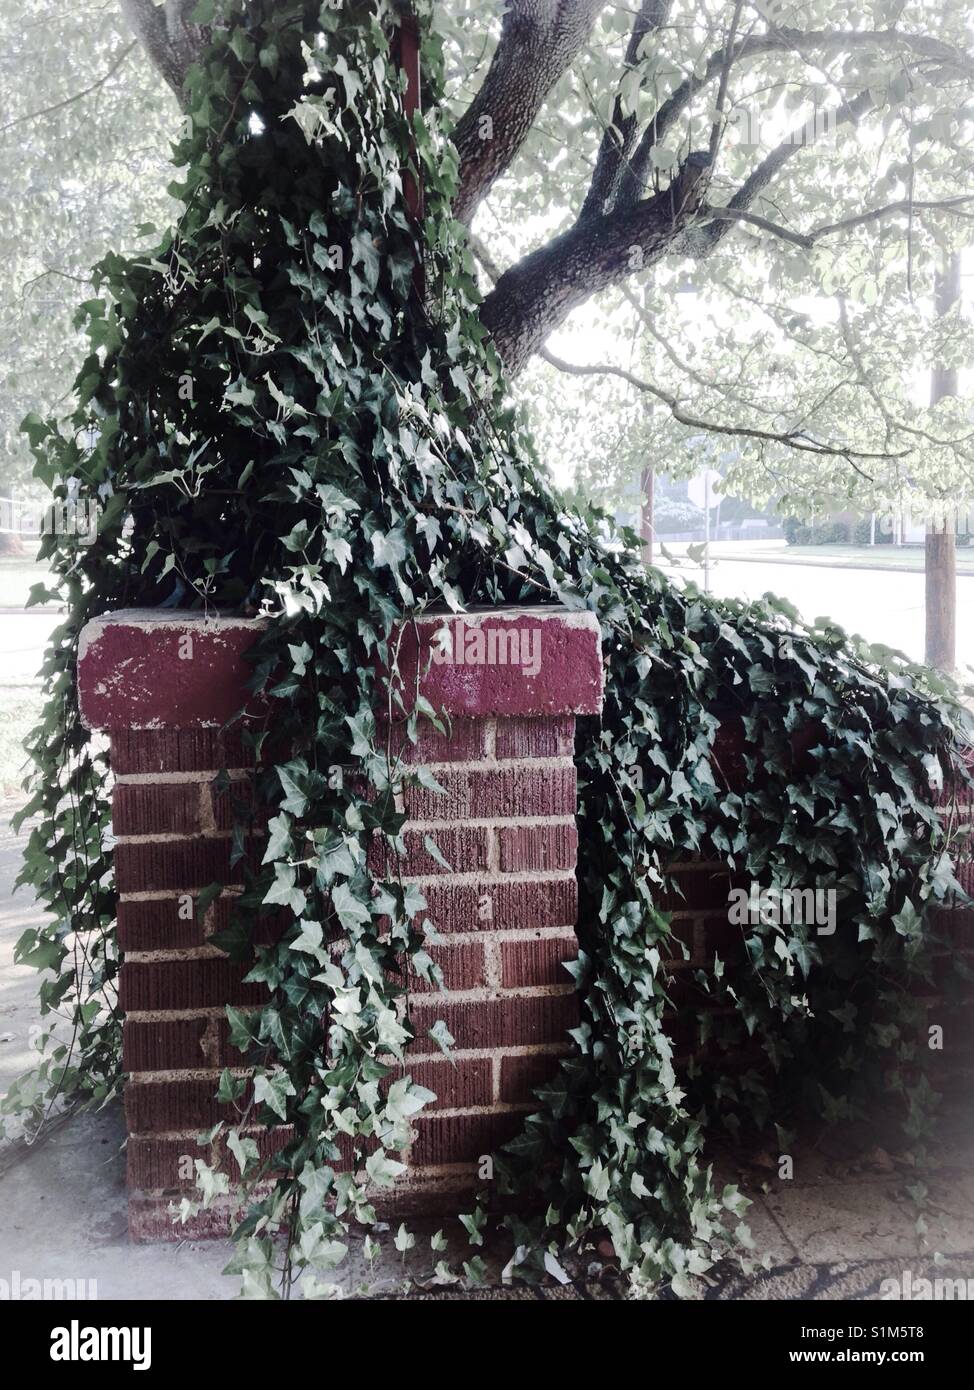 Overgrown ivy- ivy grows wildly over brick pillar and railing on front porch Stock Photo